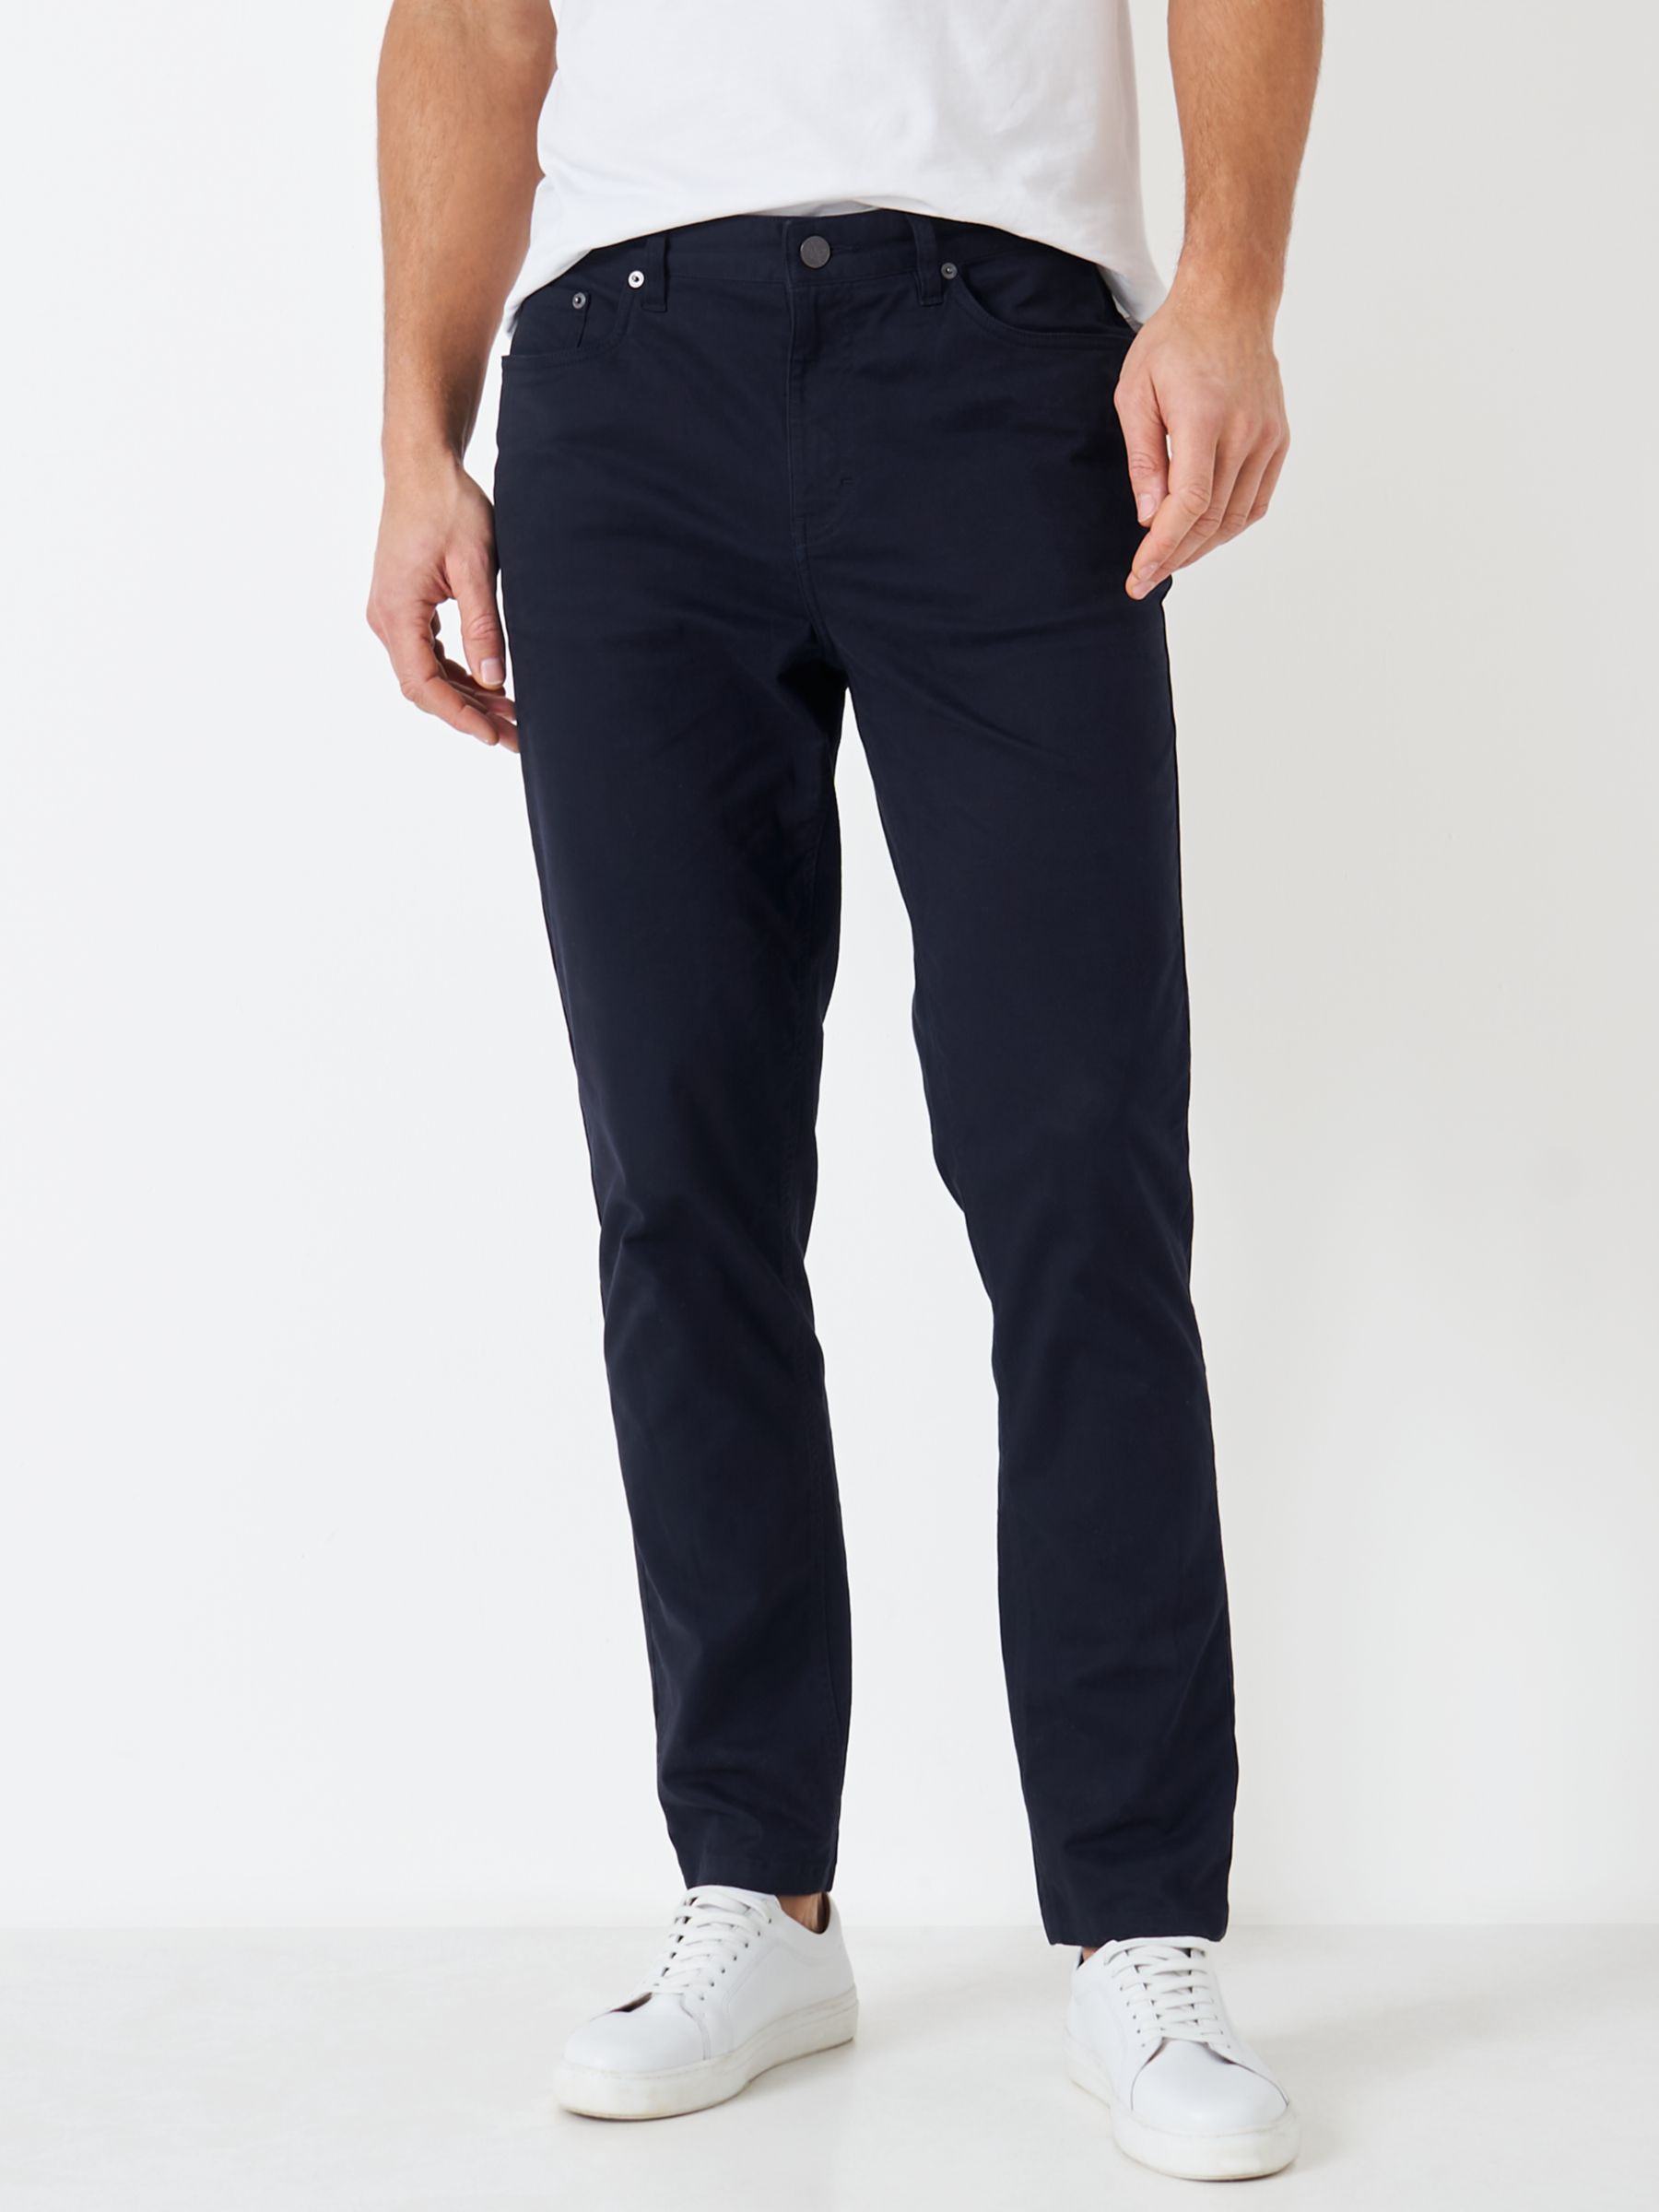 Crew Clothing Spencer Slim Fit Trousers, Navy, 32S